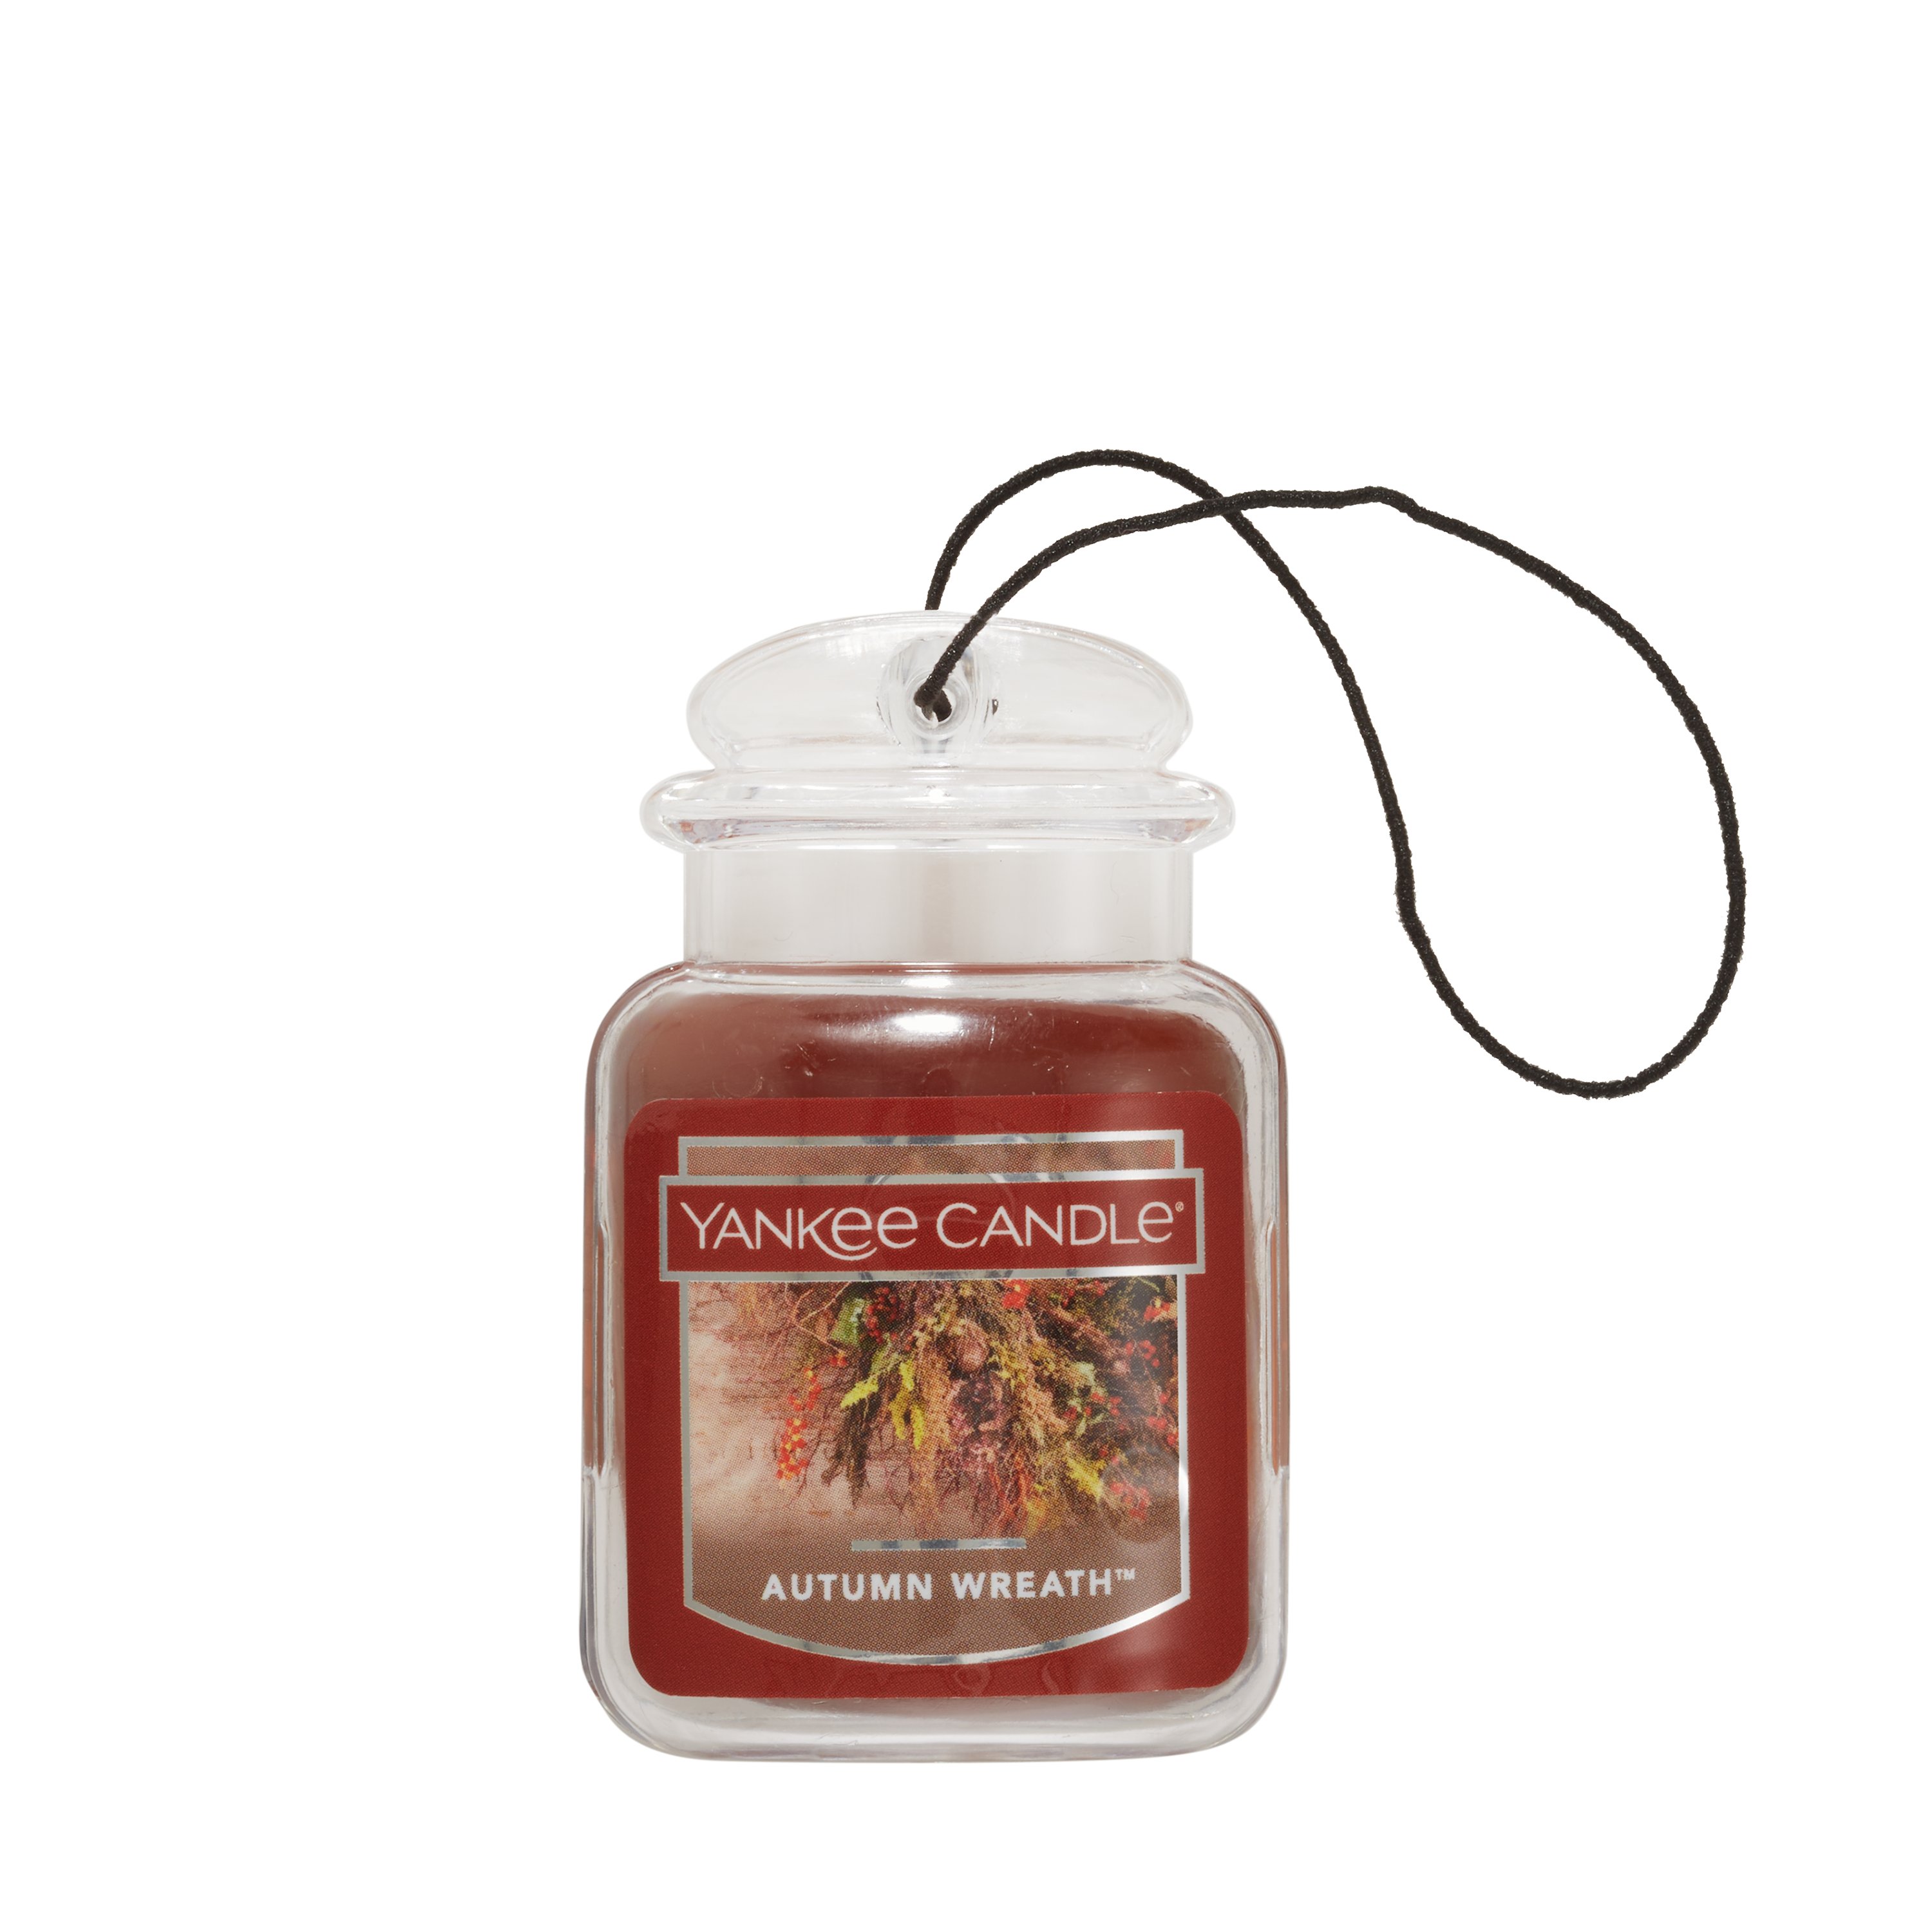 Fall Yankee Candle Sale: Here's How to Score the Perfect Autumnal Scent